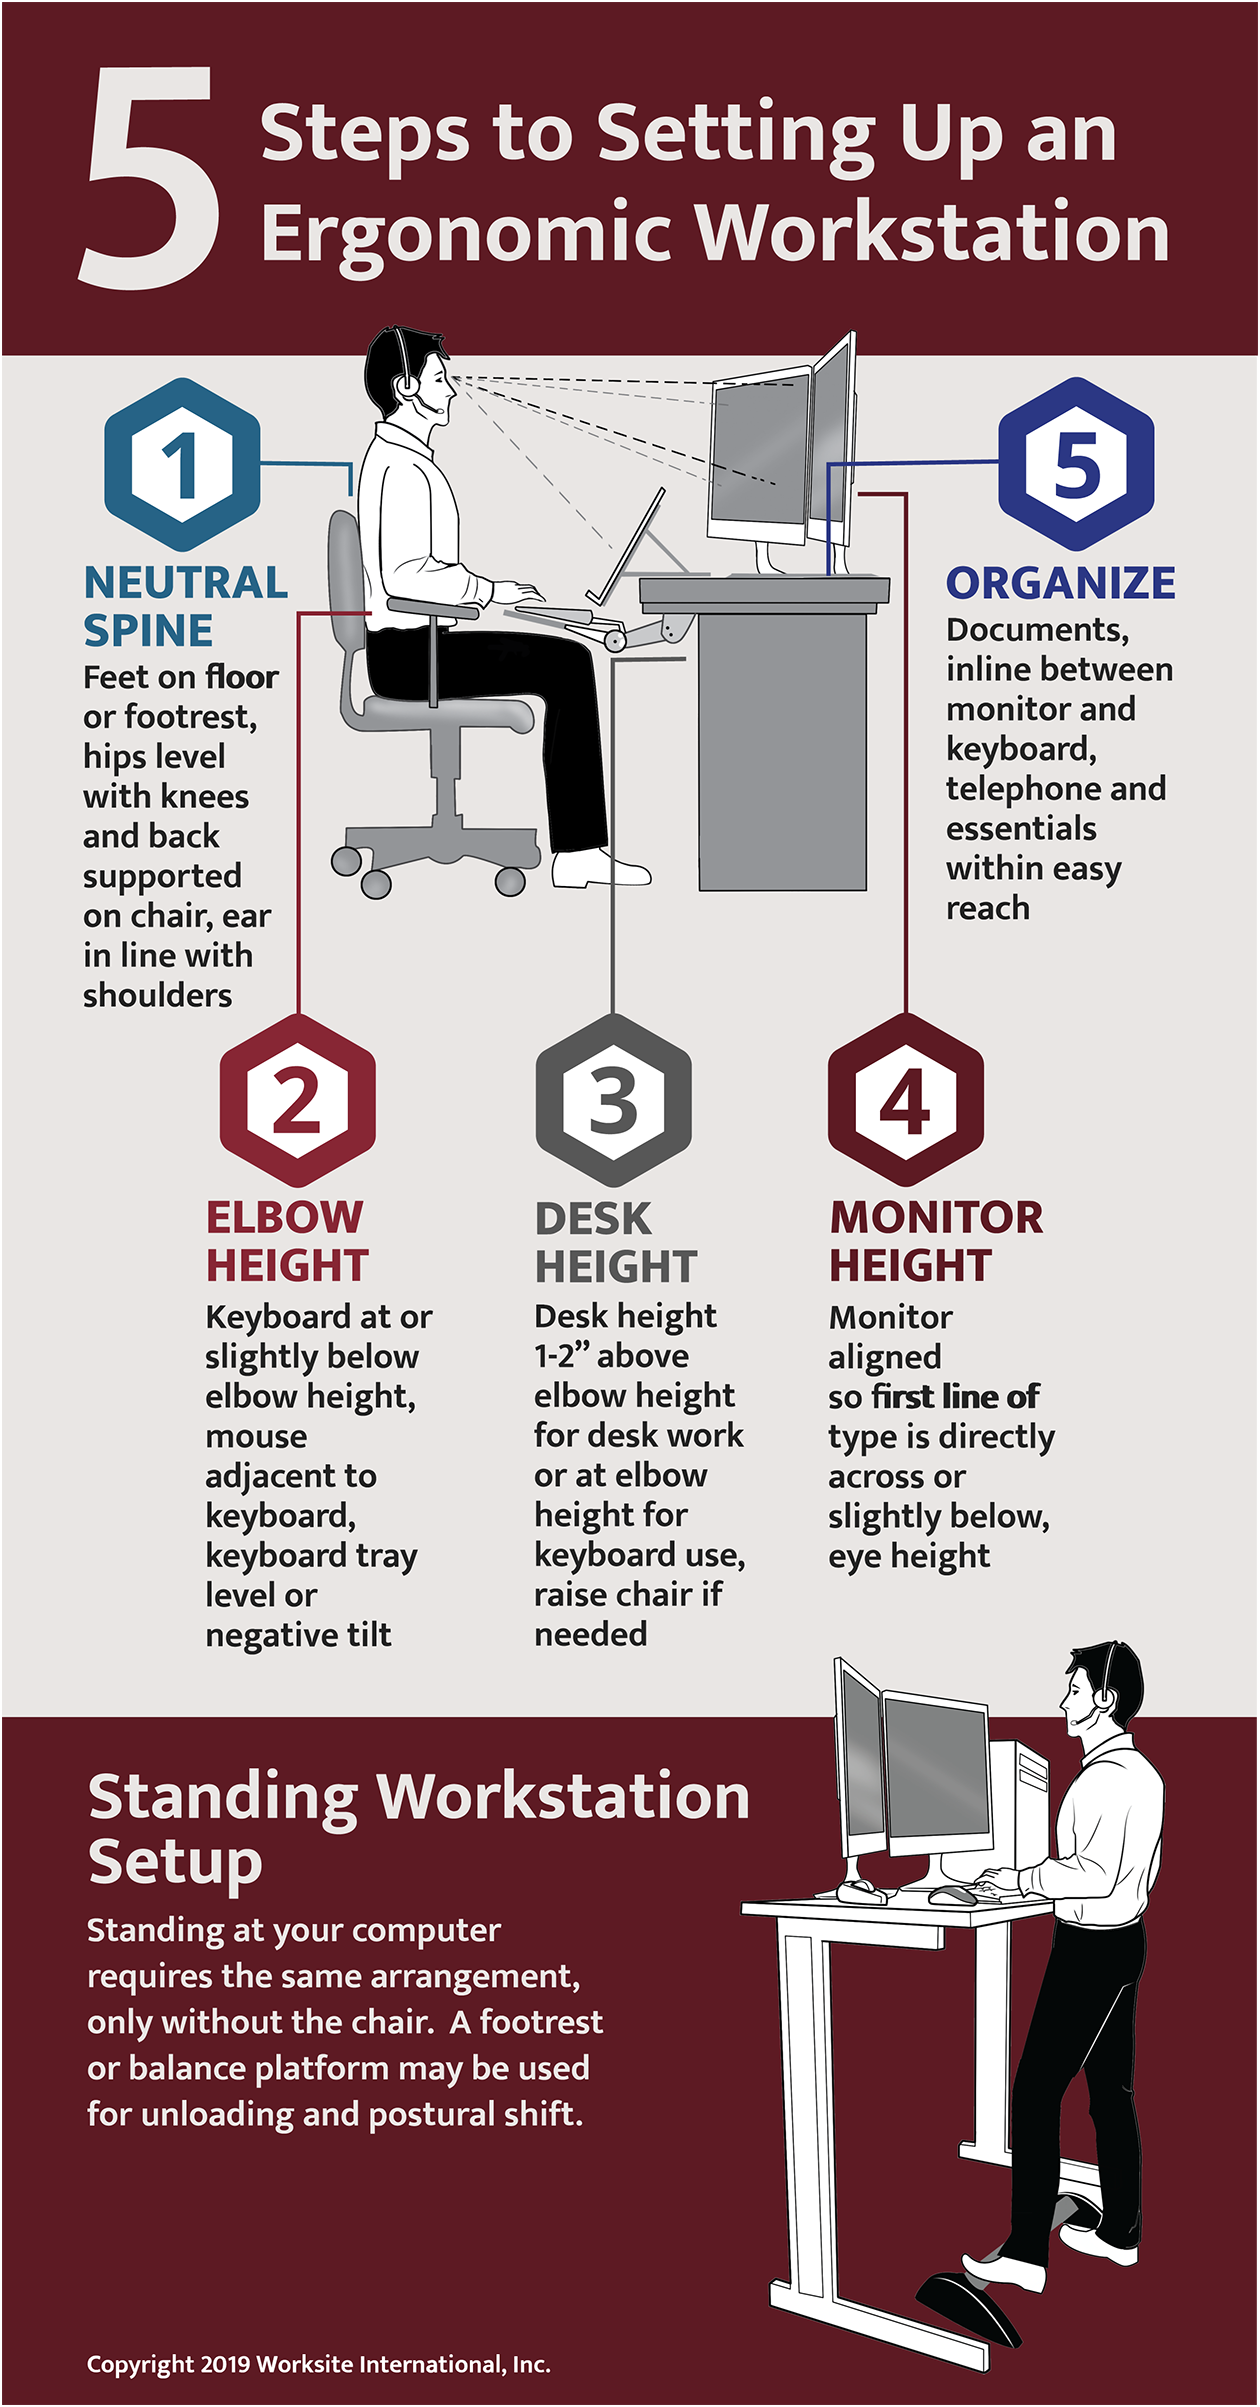 5-steps-to-setting-up-an-ergonomic-workstation-infographic-1260px.png